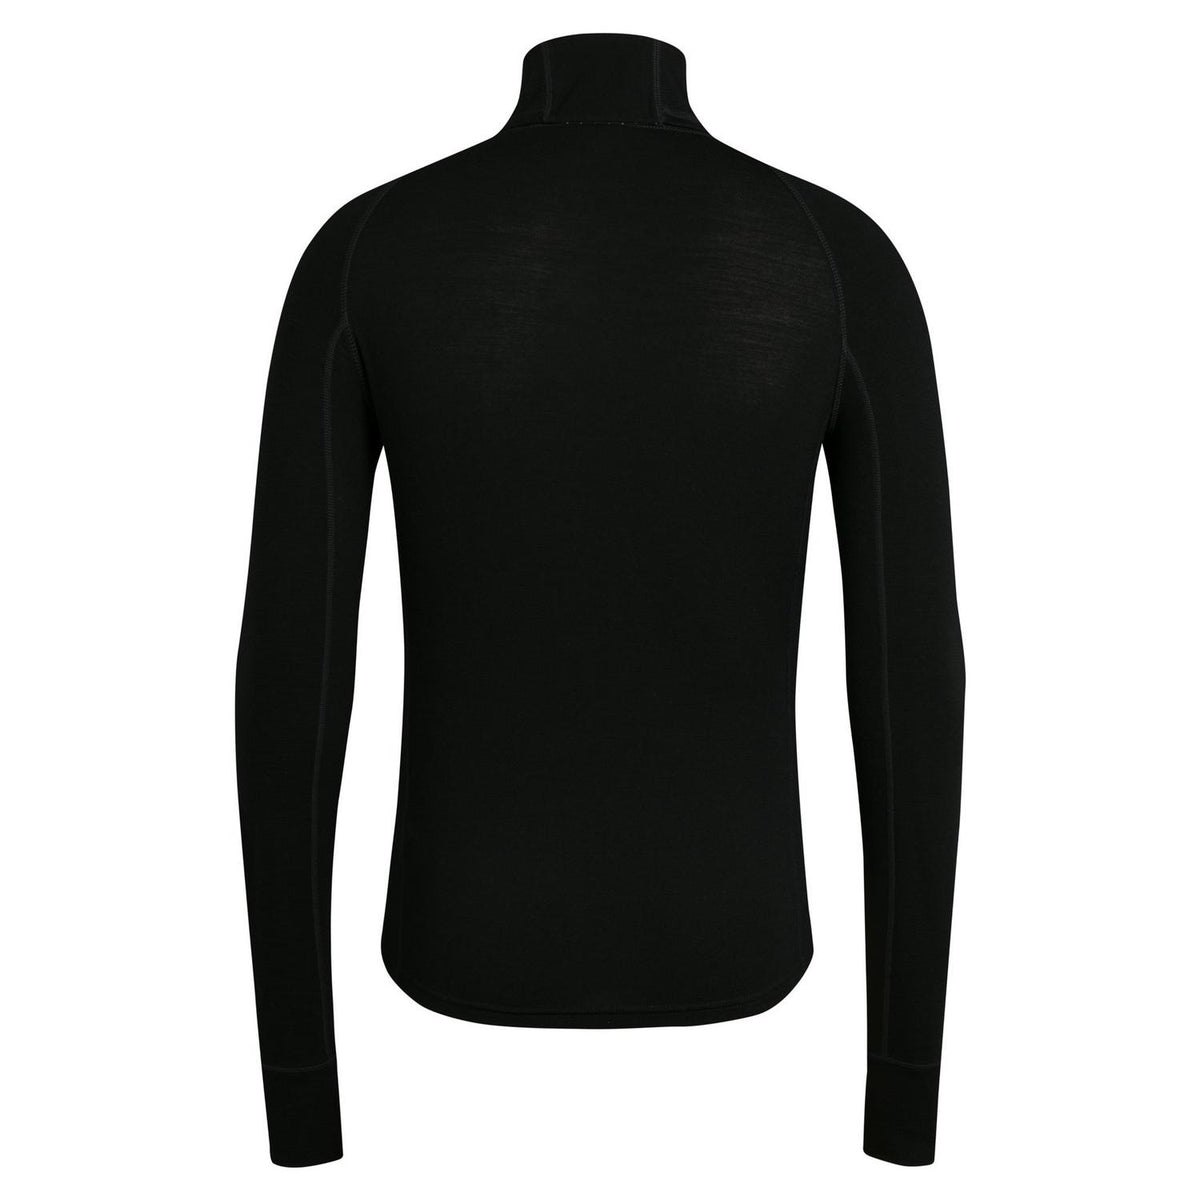 Review: Rapha Winter Base Layer